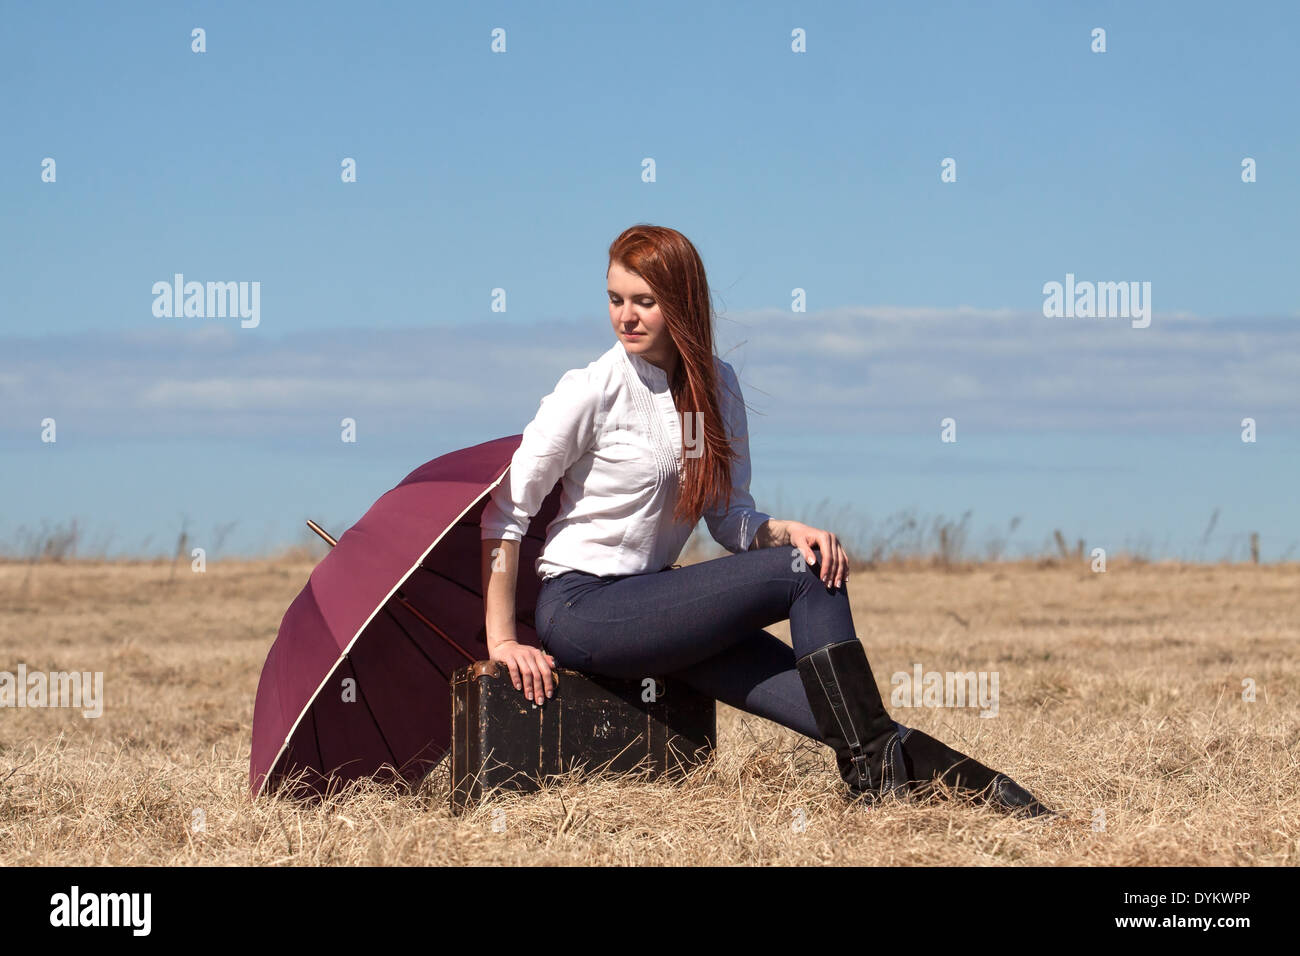 Red haired girl with vintage bag and umbrella Stock Photo